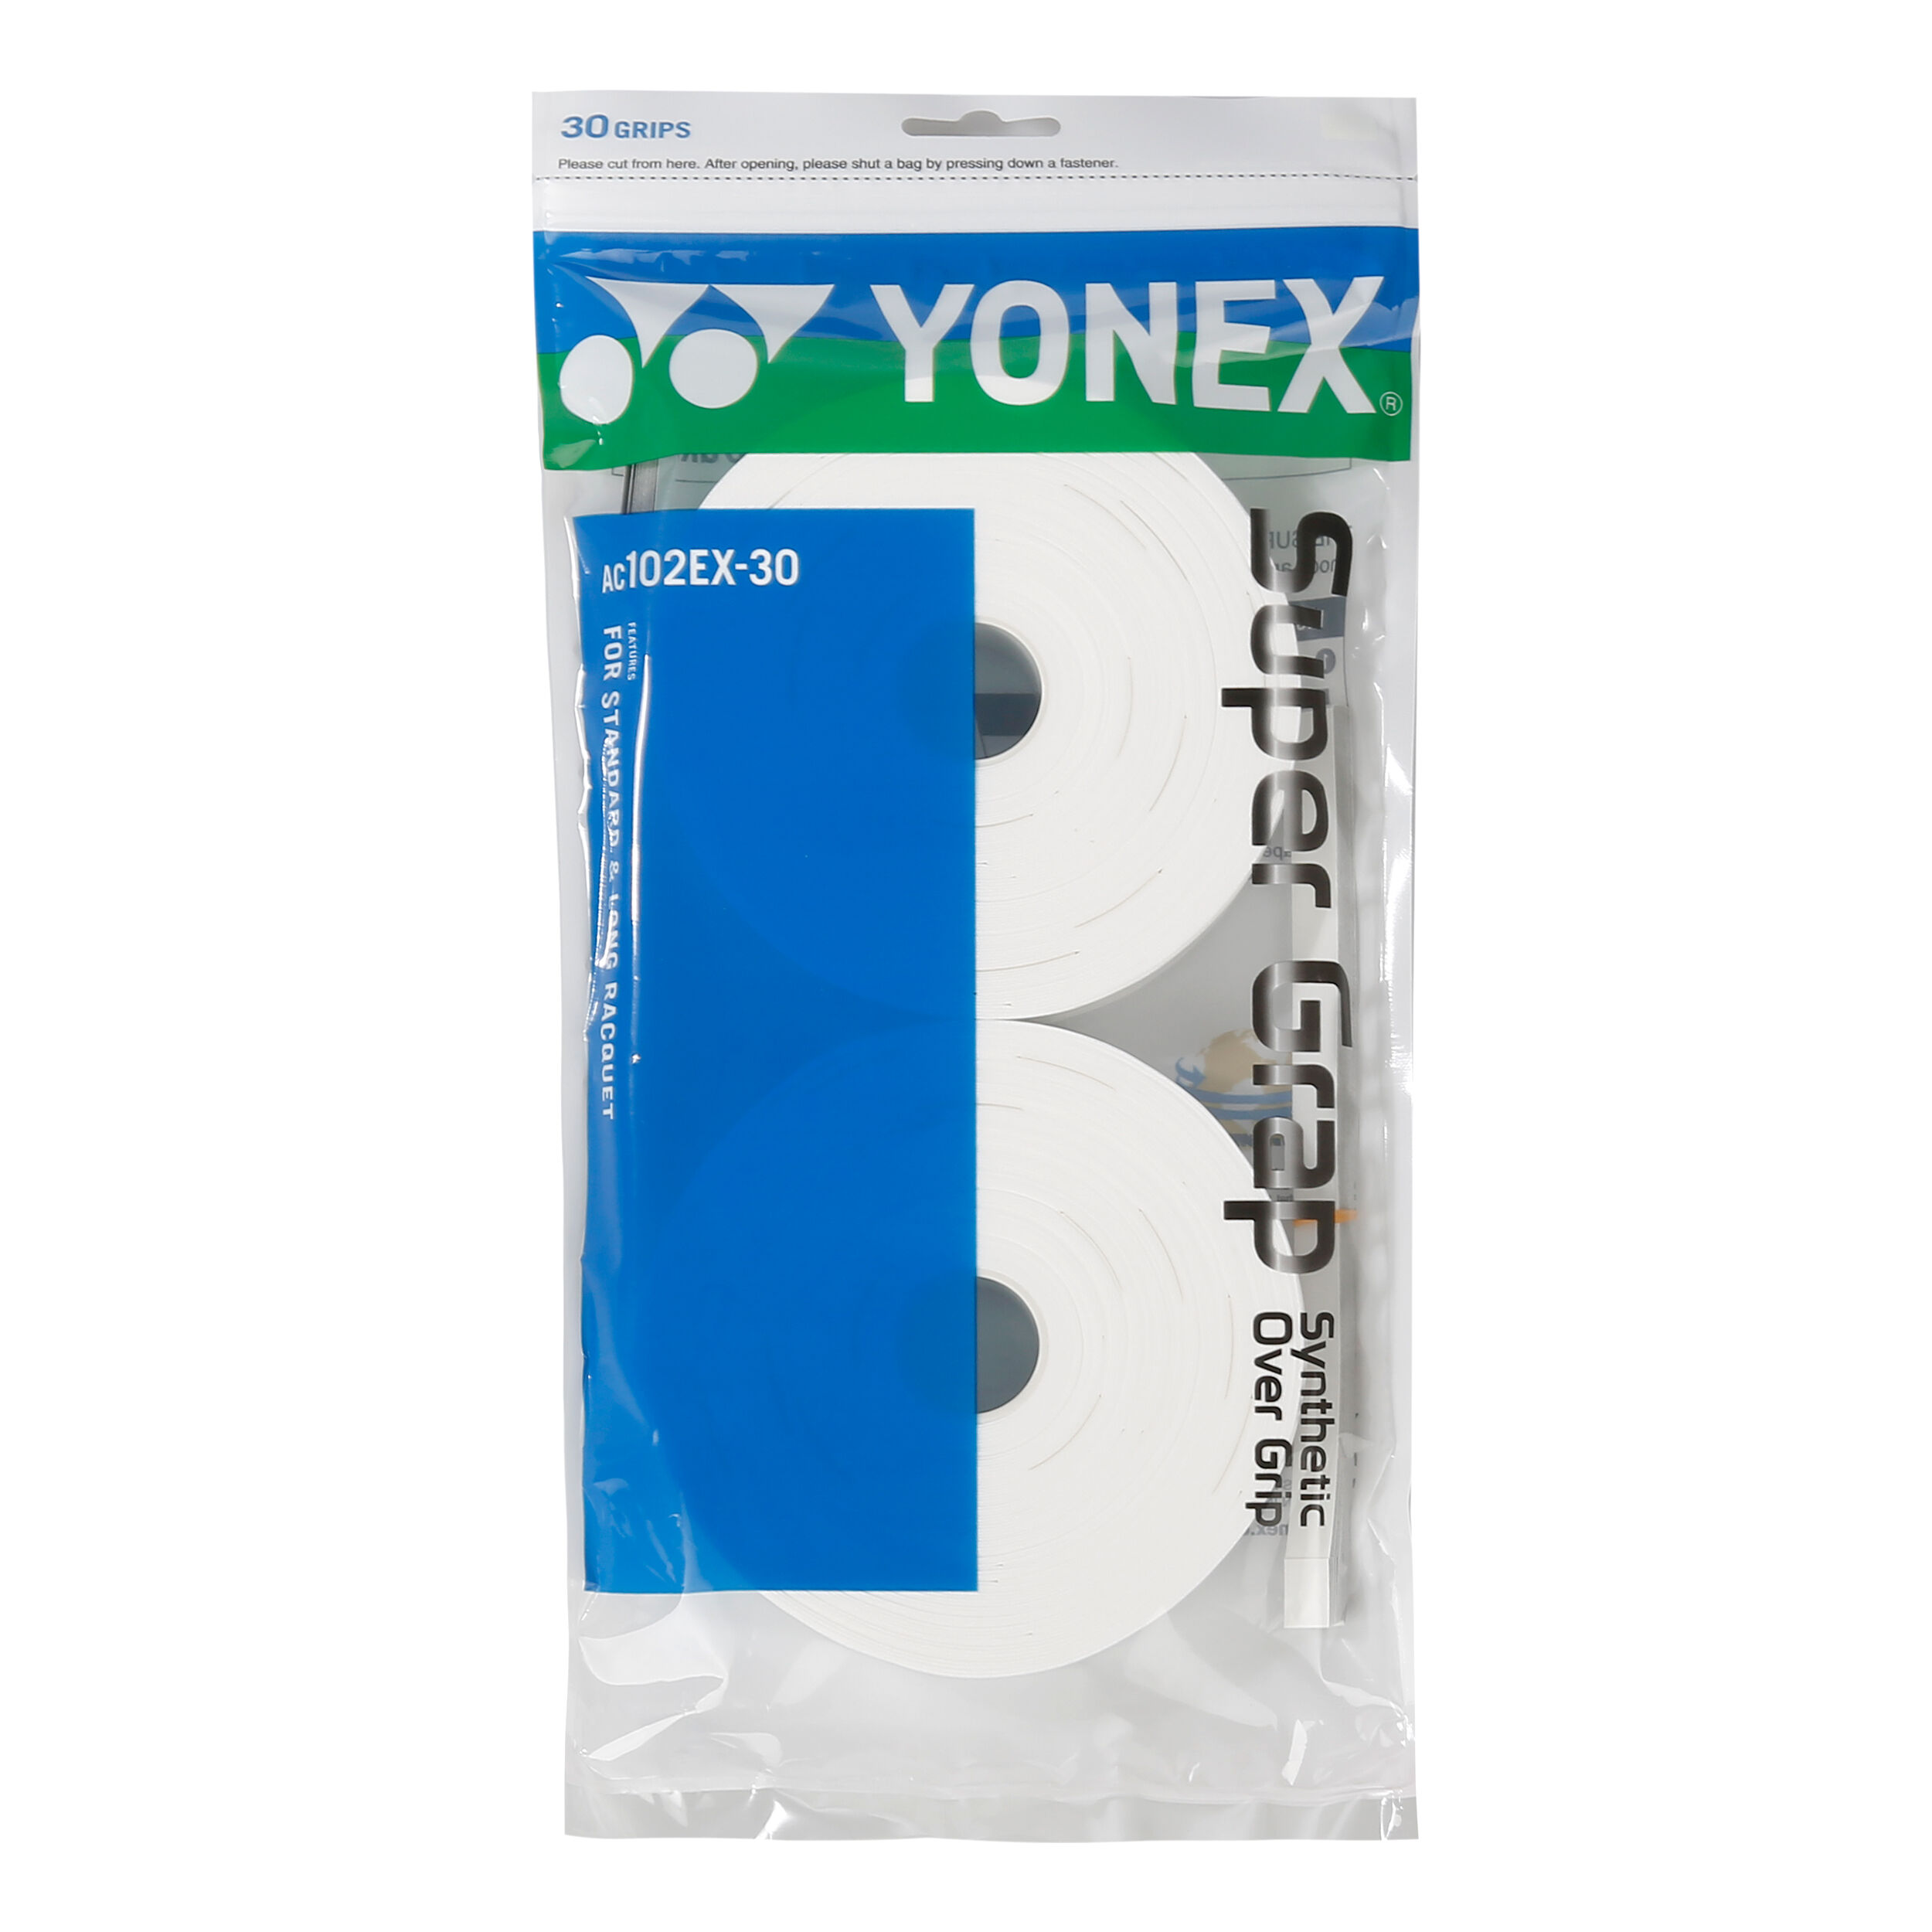 Yonex Super Grap Over Grips 12 Pack White in Resealable Pack Tennis & Badminton 